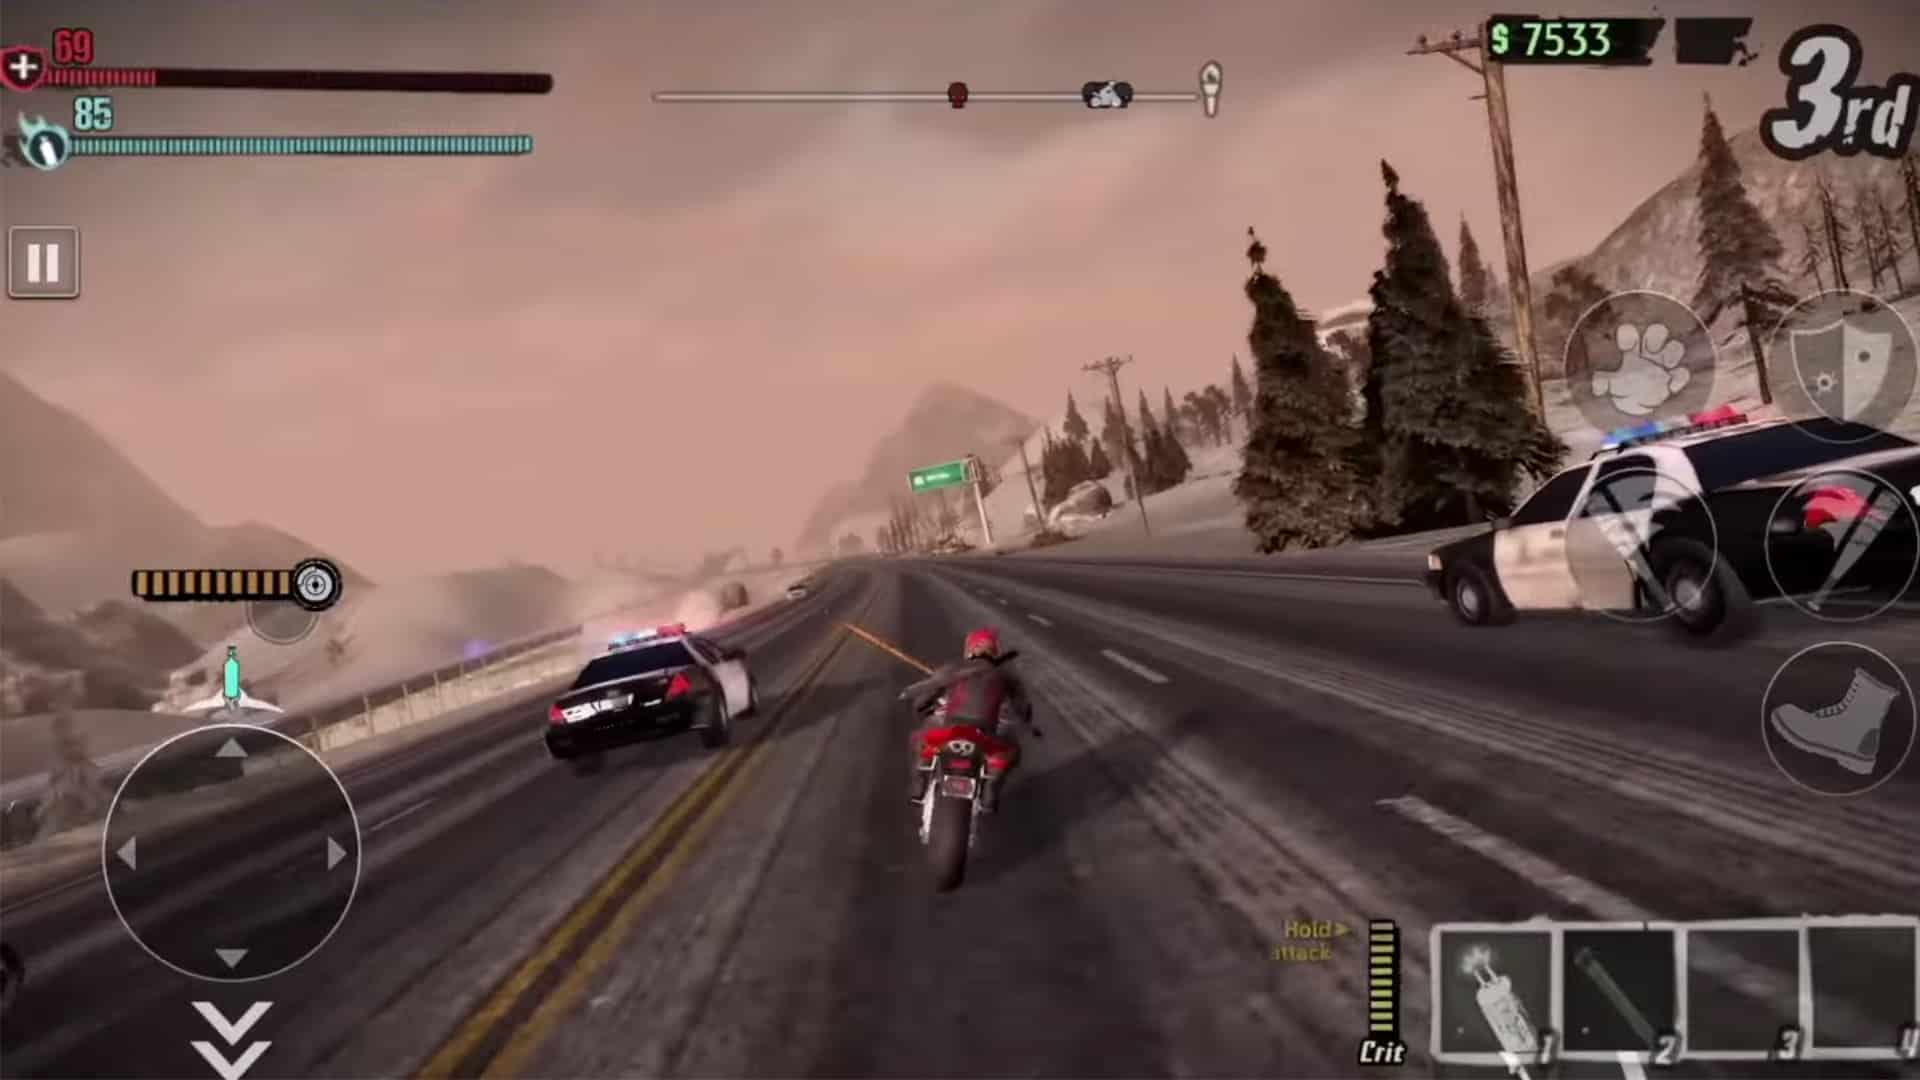 Motorcycle combat racer Road Redemption now available for pre-order on mobile